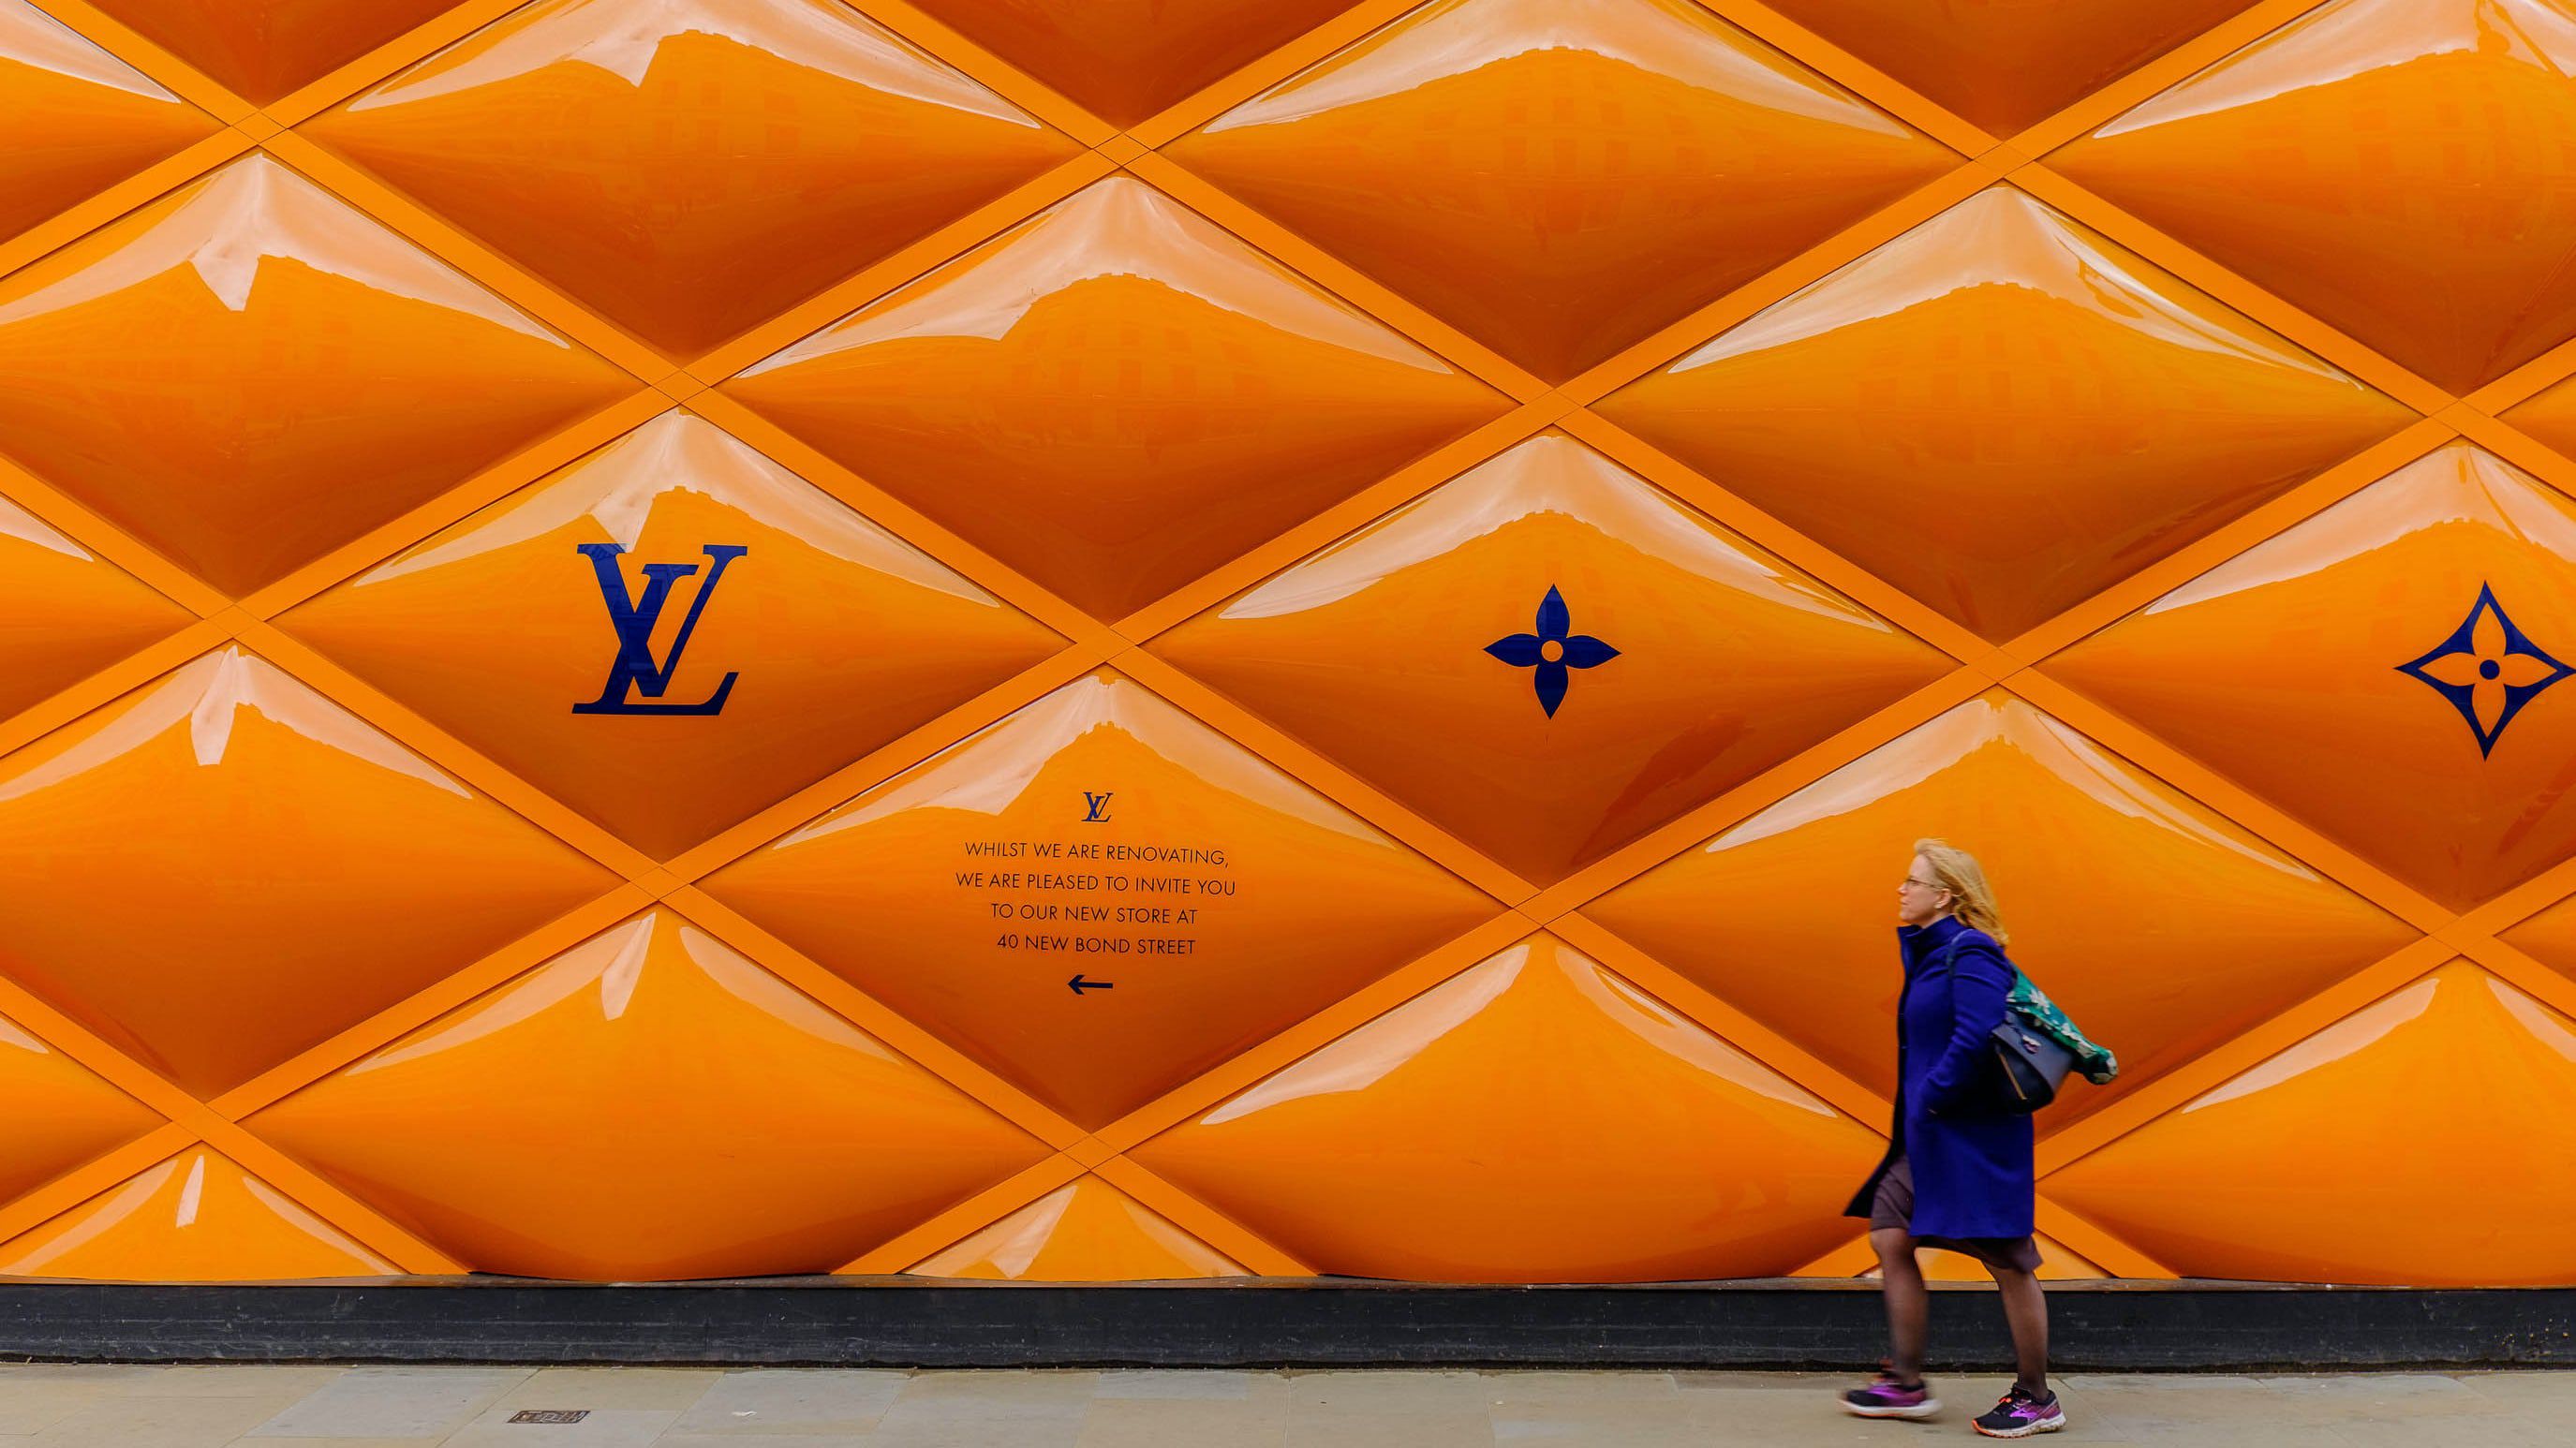 Hermès Becomes the Second Most Valuable Luxury Company Behind LVMH